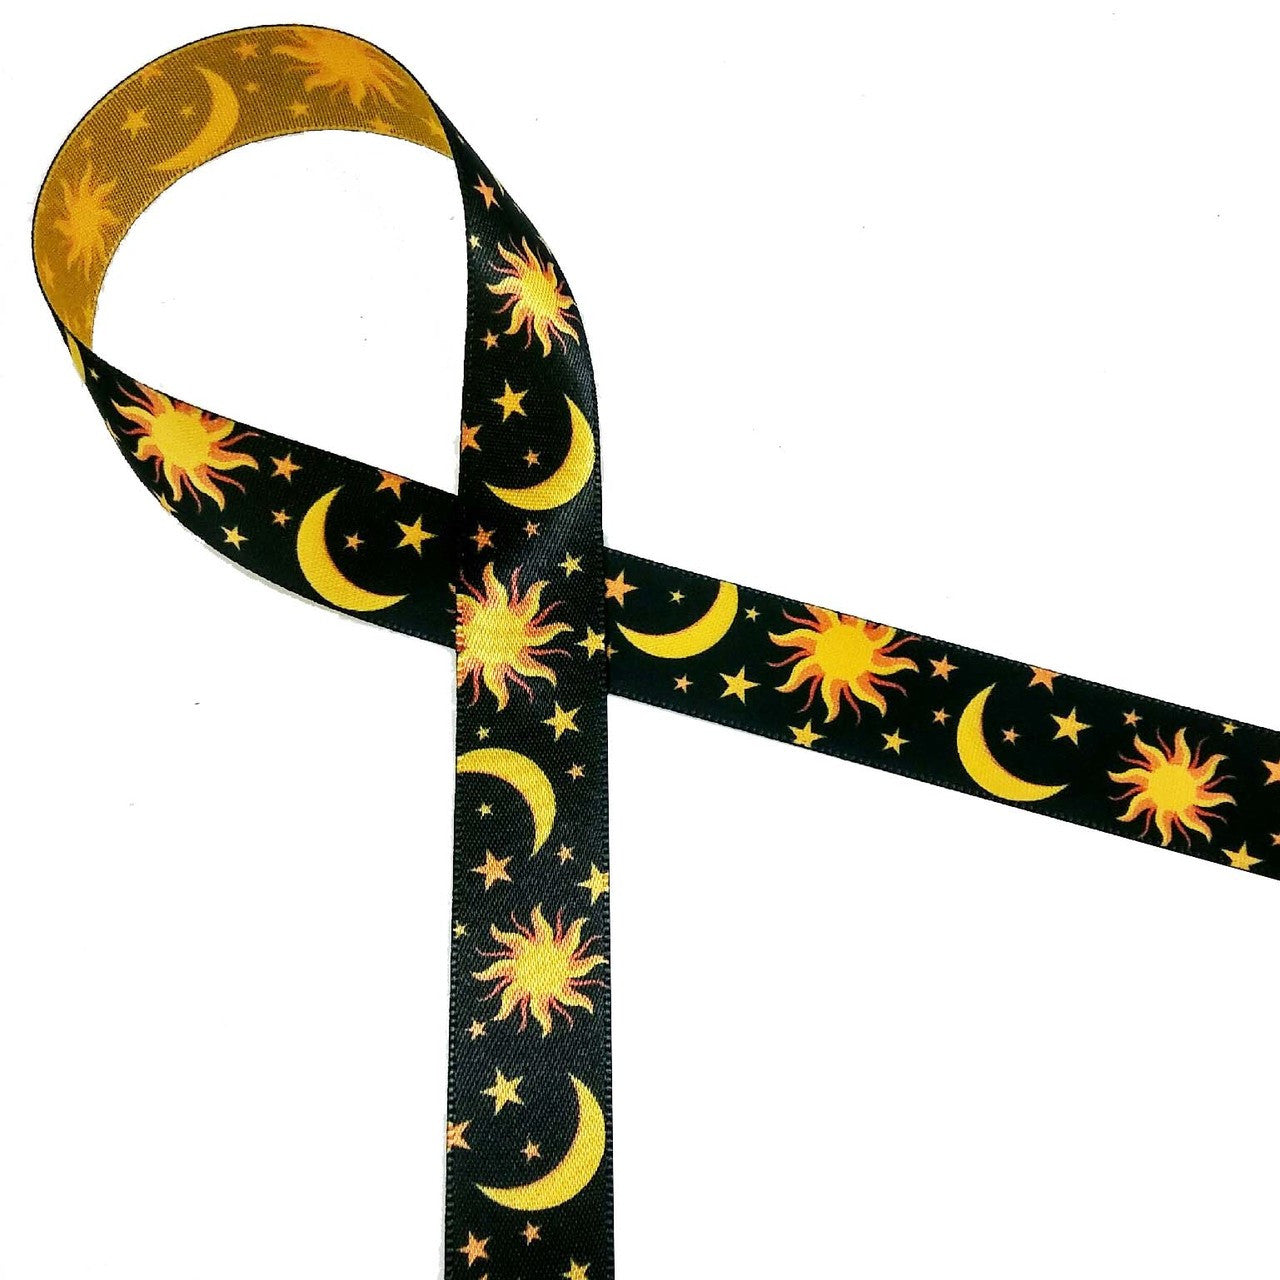 The Sun, Moon and Stars on a black background printed on 5/8" gold single face satin ribbon is a beautiful ribbon for the most thoughtful of friends.